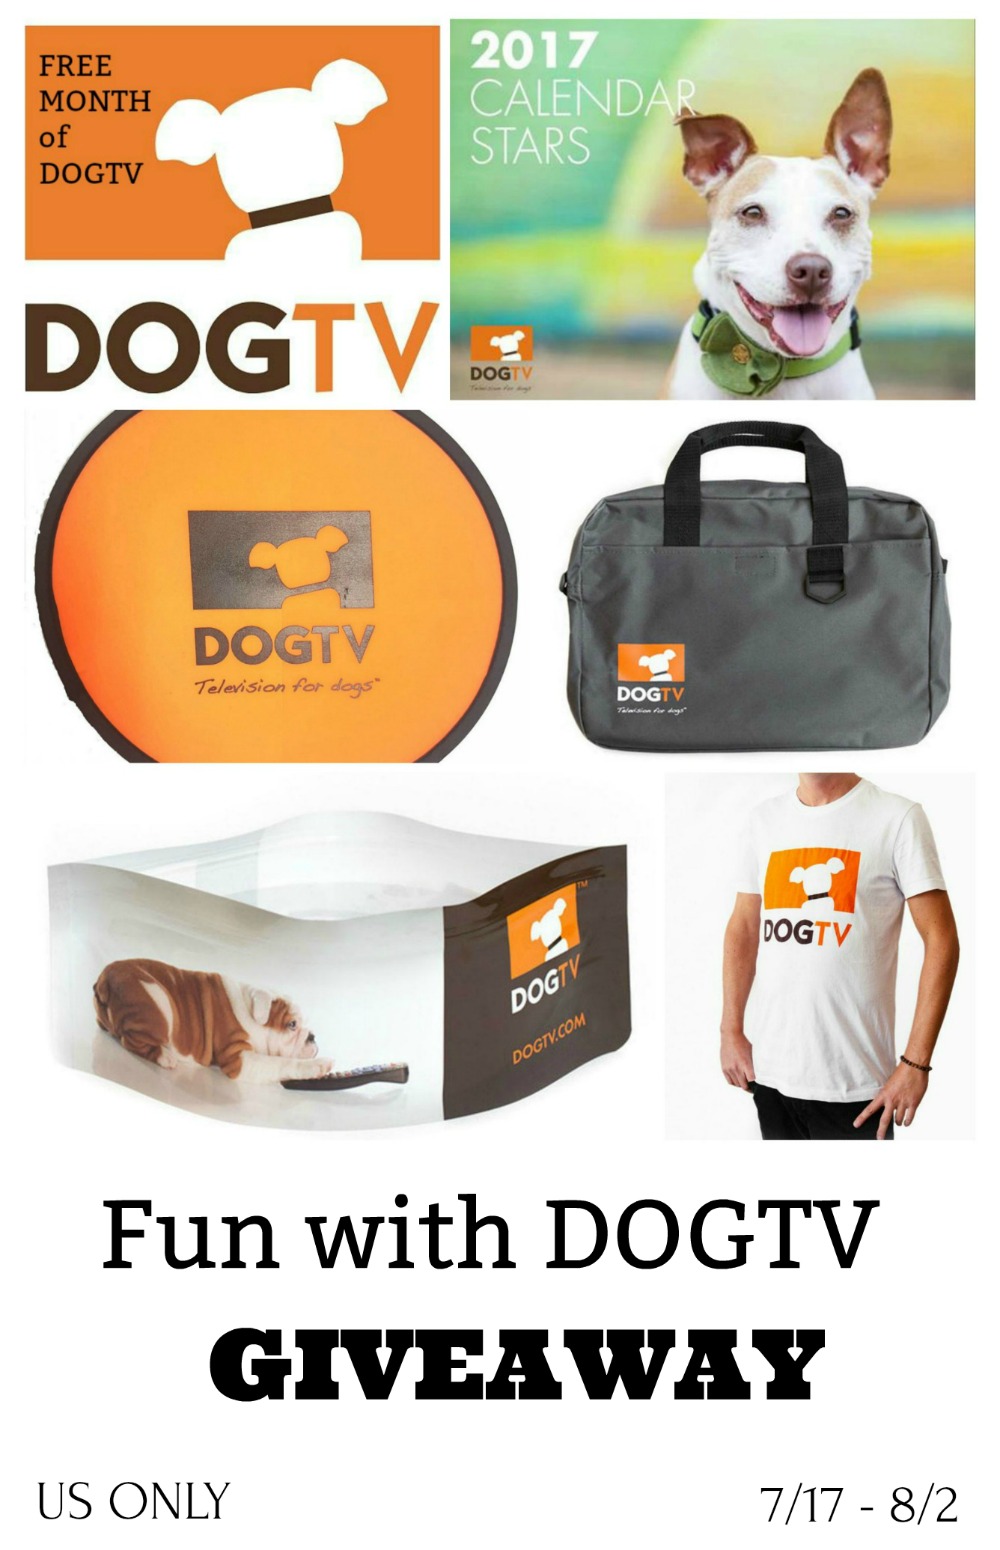 Fun with DOGTV - Prize Package Giveaway! (ends 8/2)